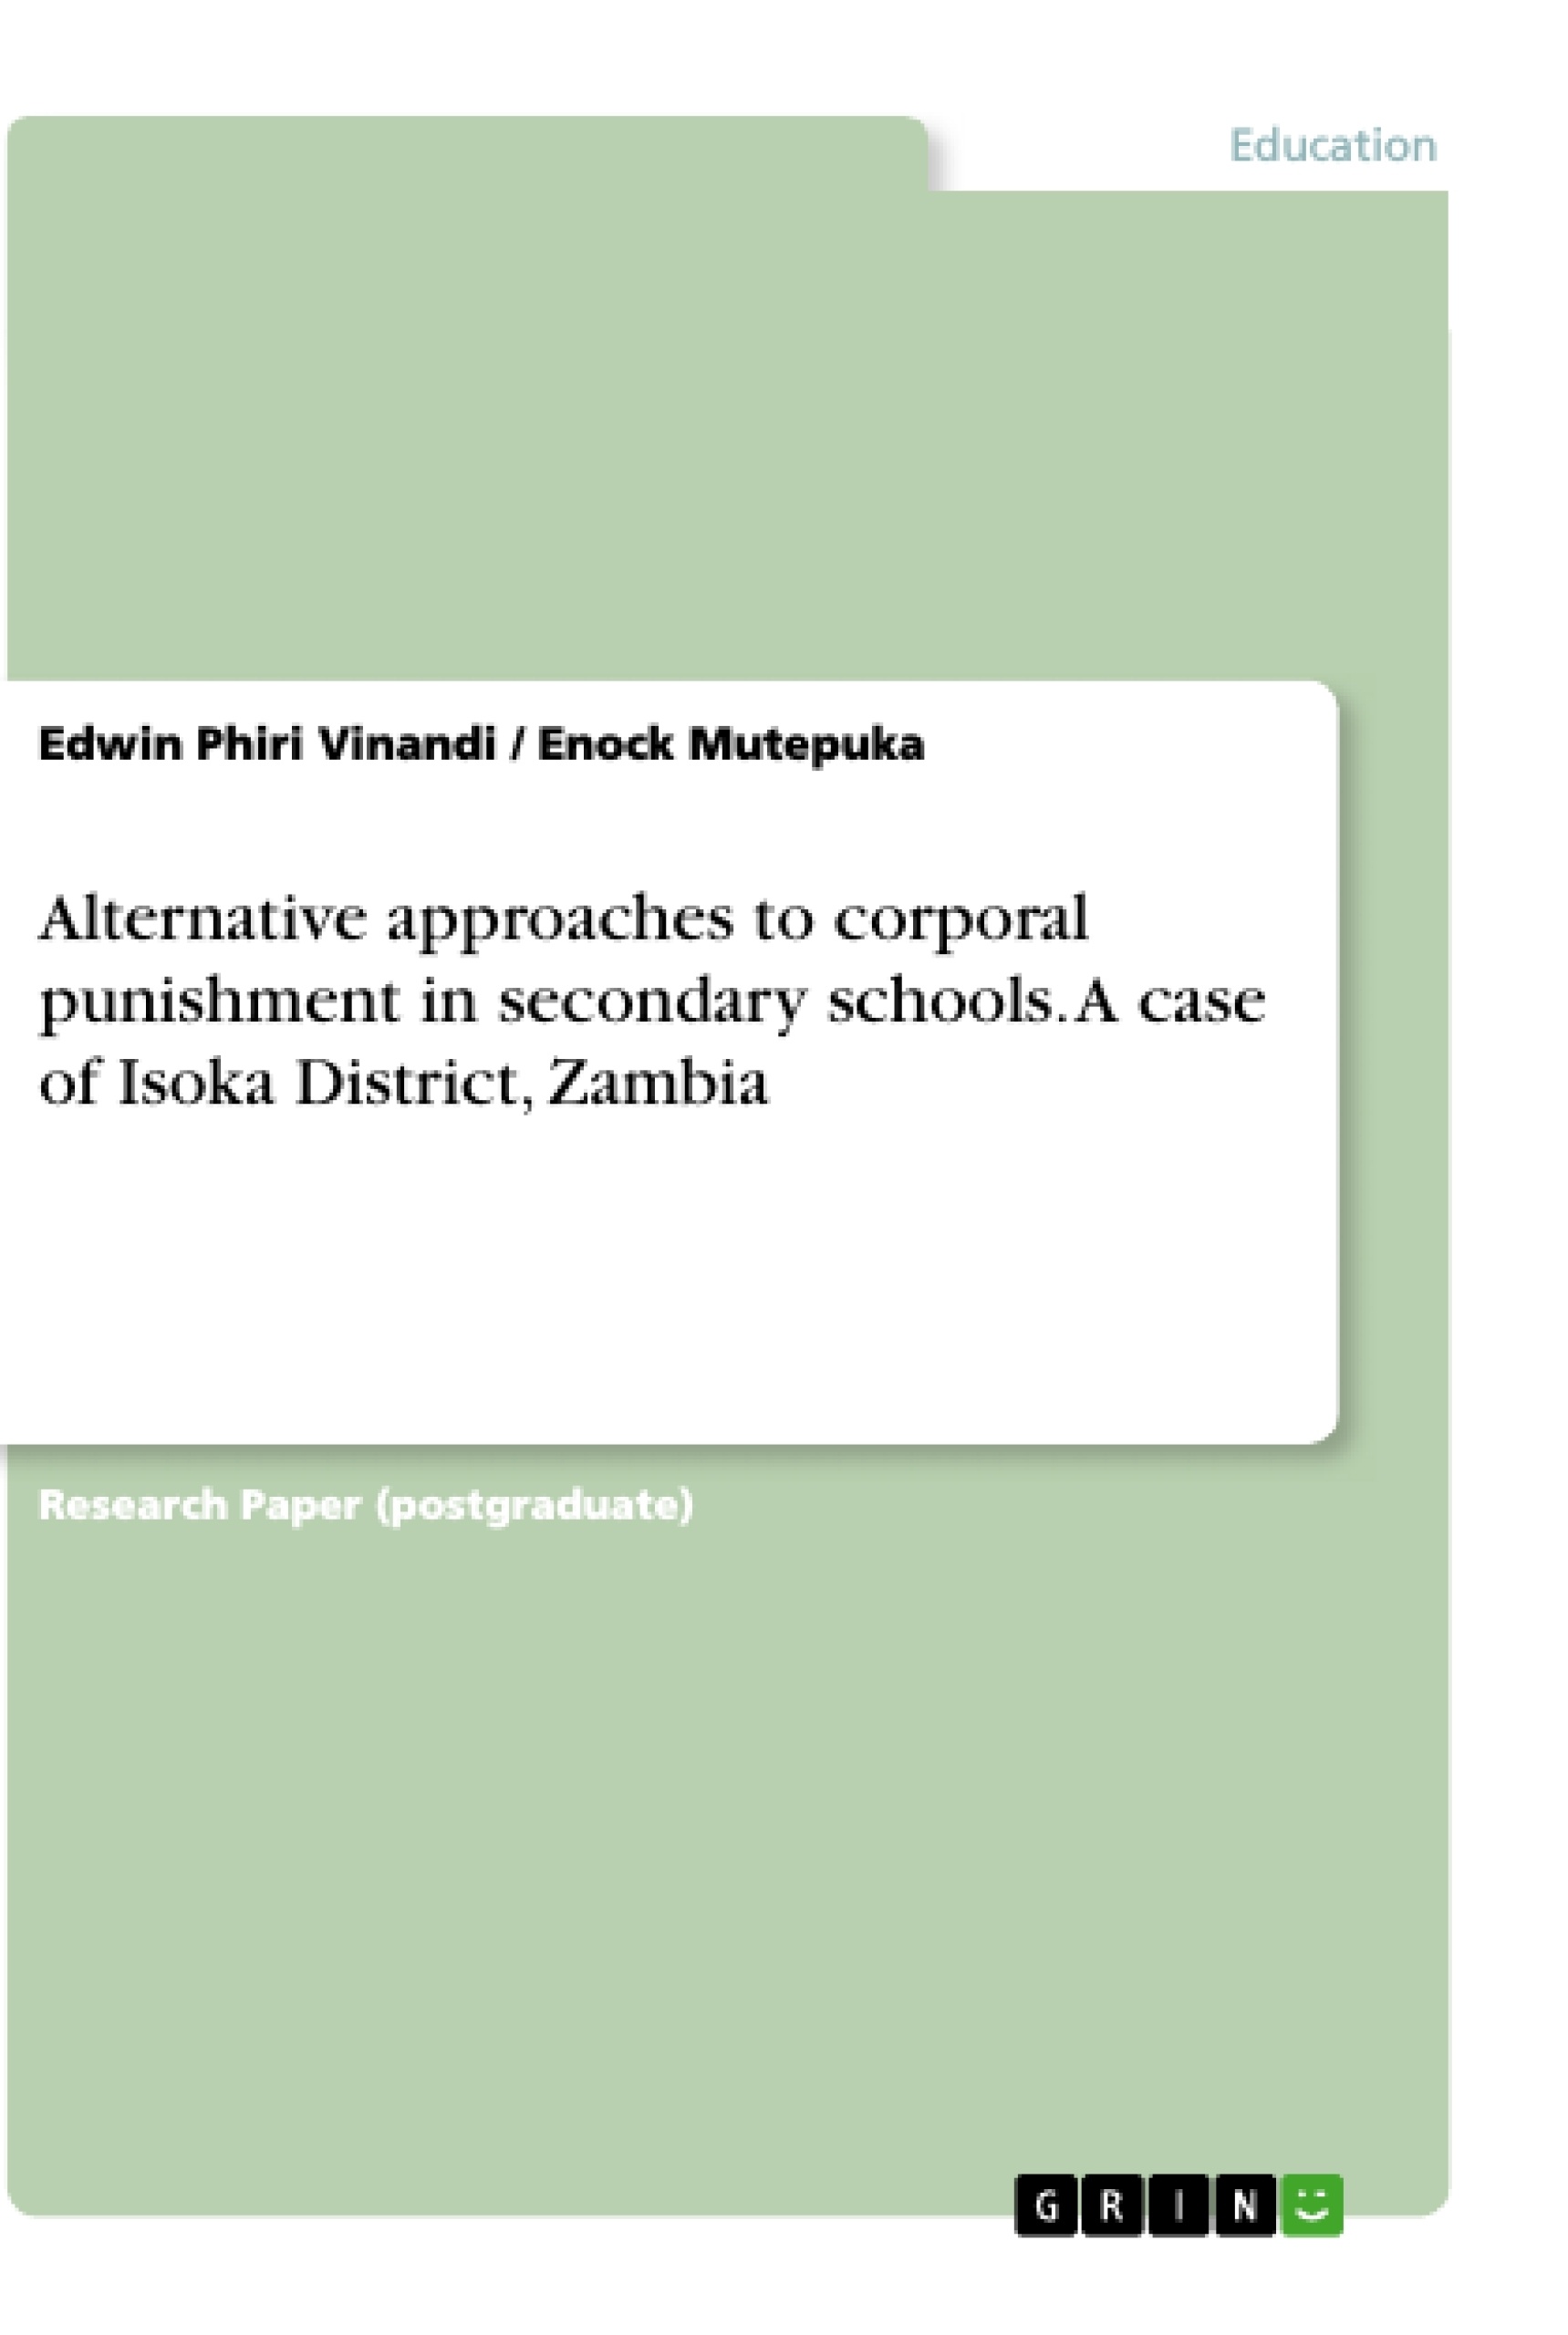 Titel: Alternative approaches to corporal punishment in secondary schools. A case of Isoka District, Zambia